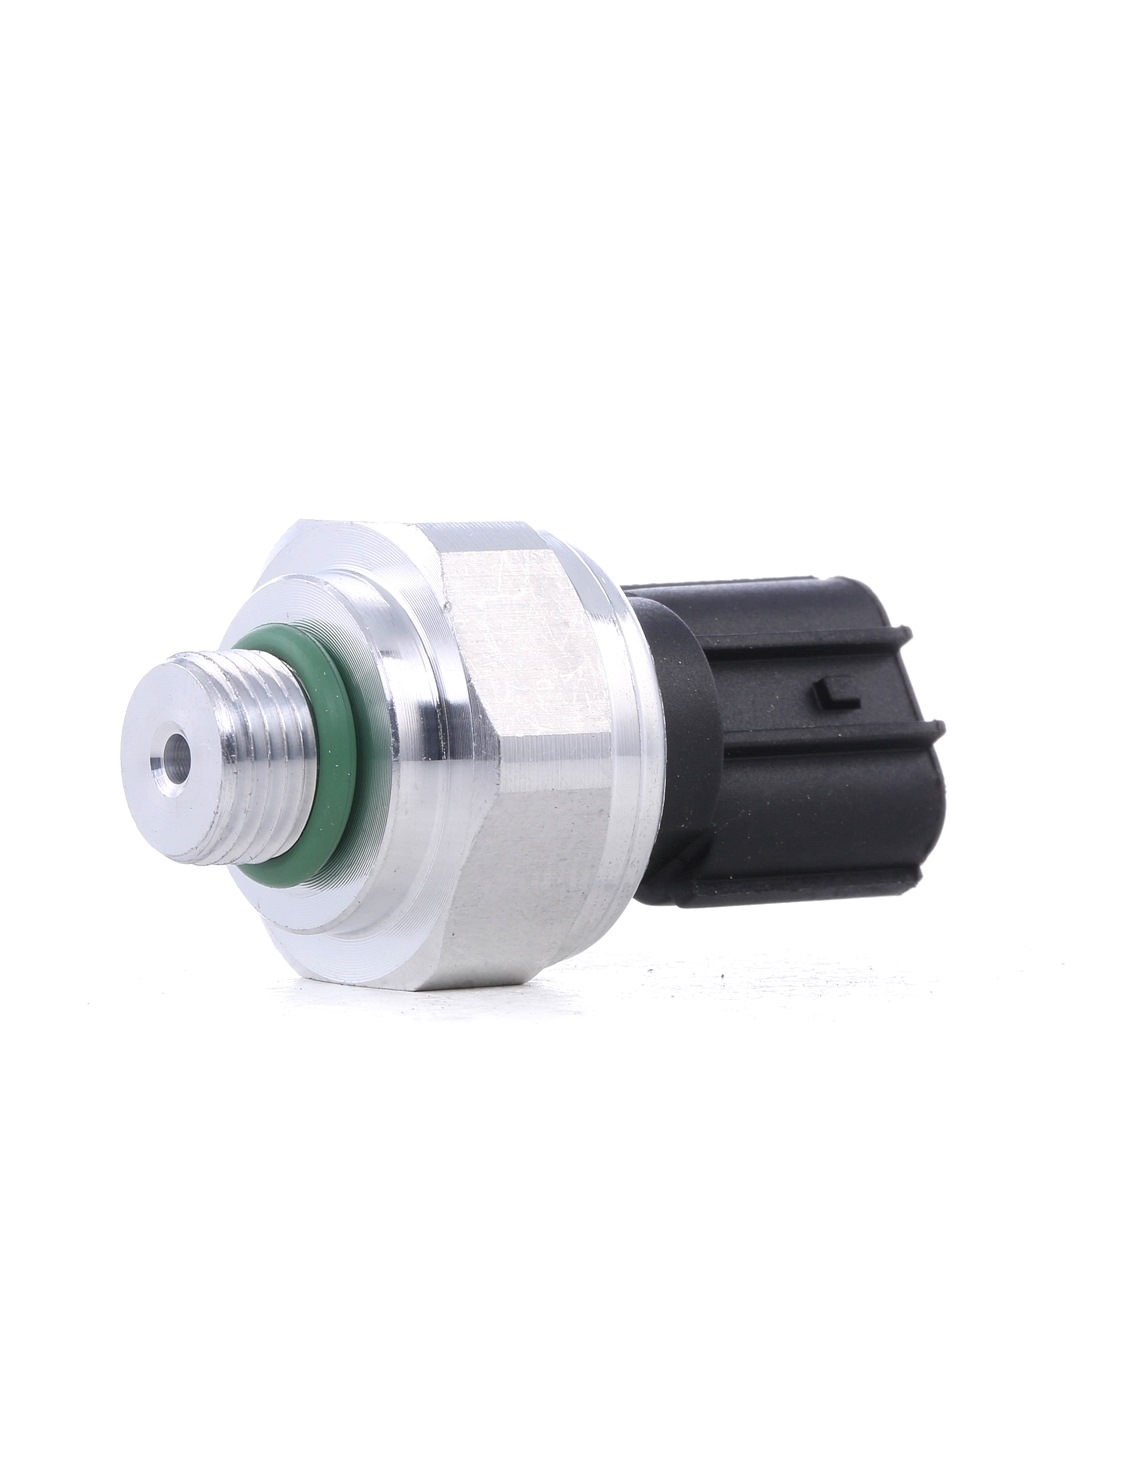 Opel VECTRA Low pressure switch for air conditioning 15925715 THERMOTEC KTT130074 online buy